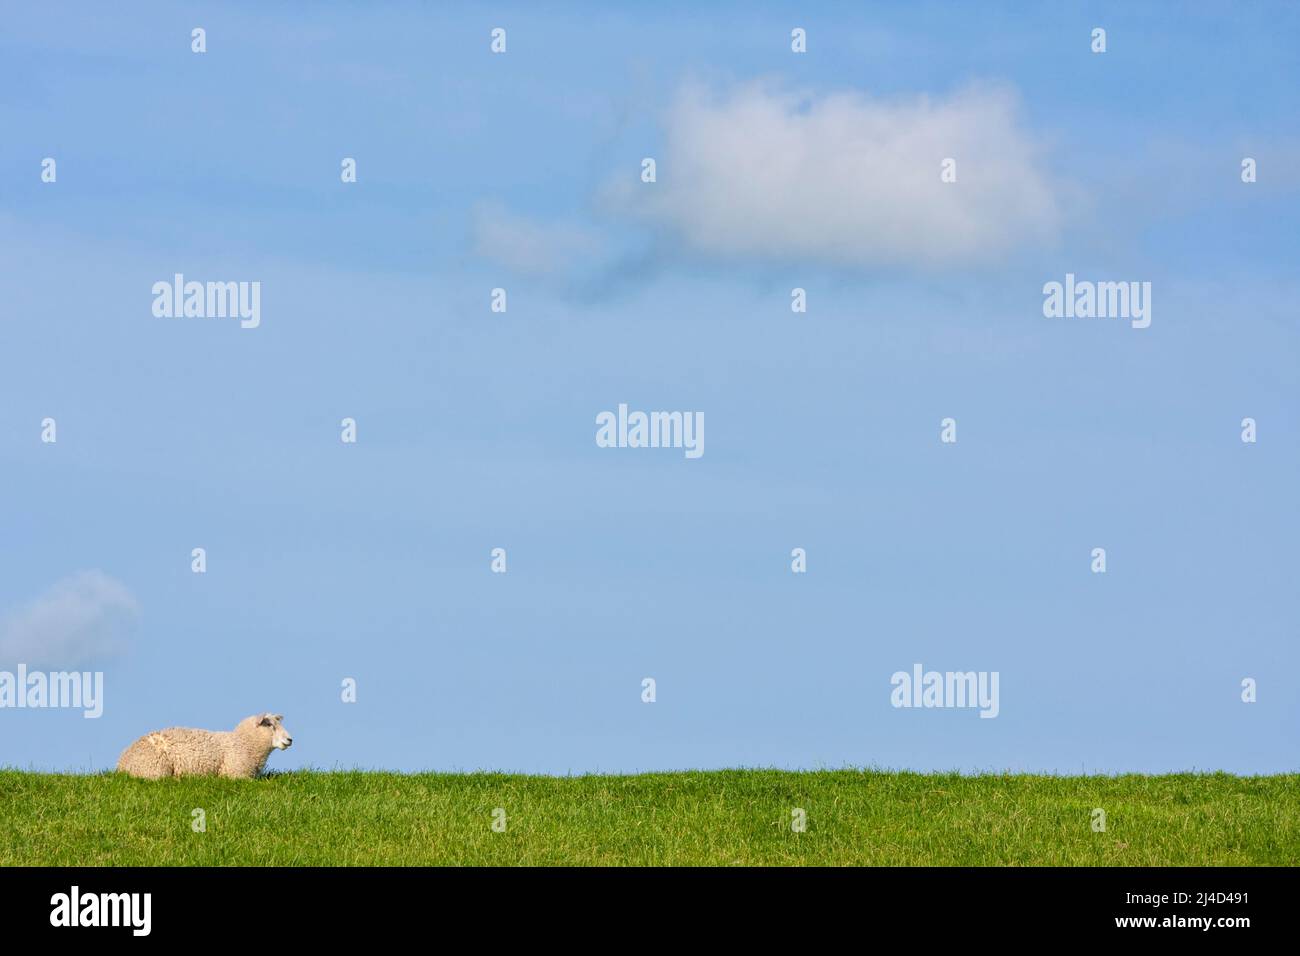 Sheep on North Sea levee under blue sky with a fluffy cloud. Large copy space. Stock Photo